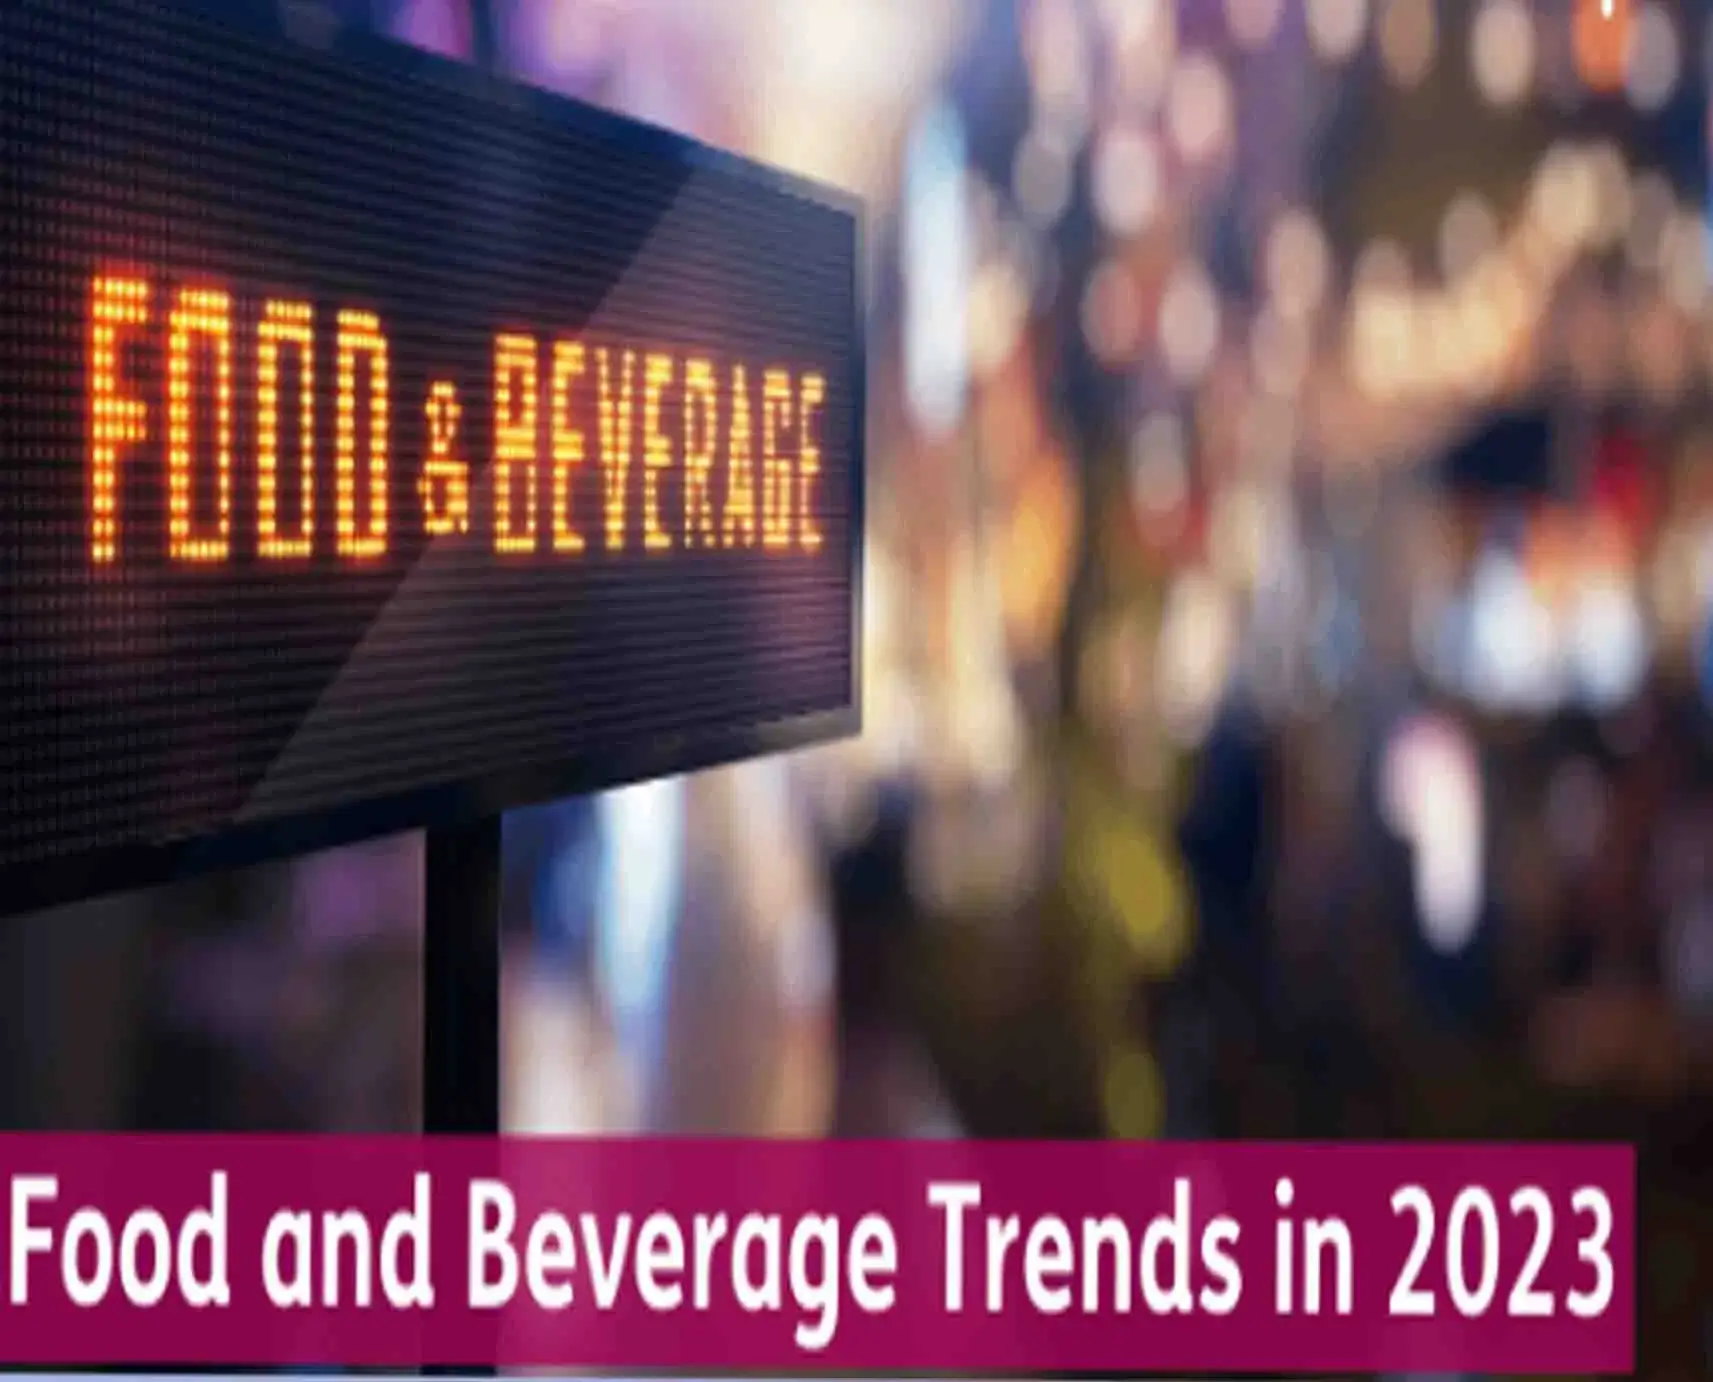 Food & Beverage Trends & Stats for Event Planners in 2023